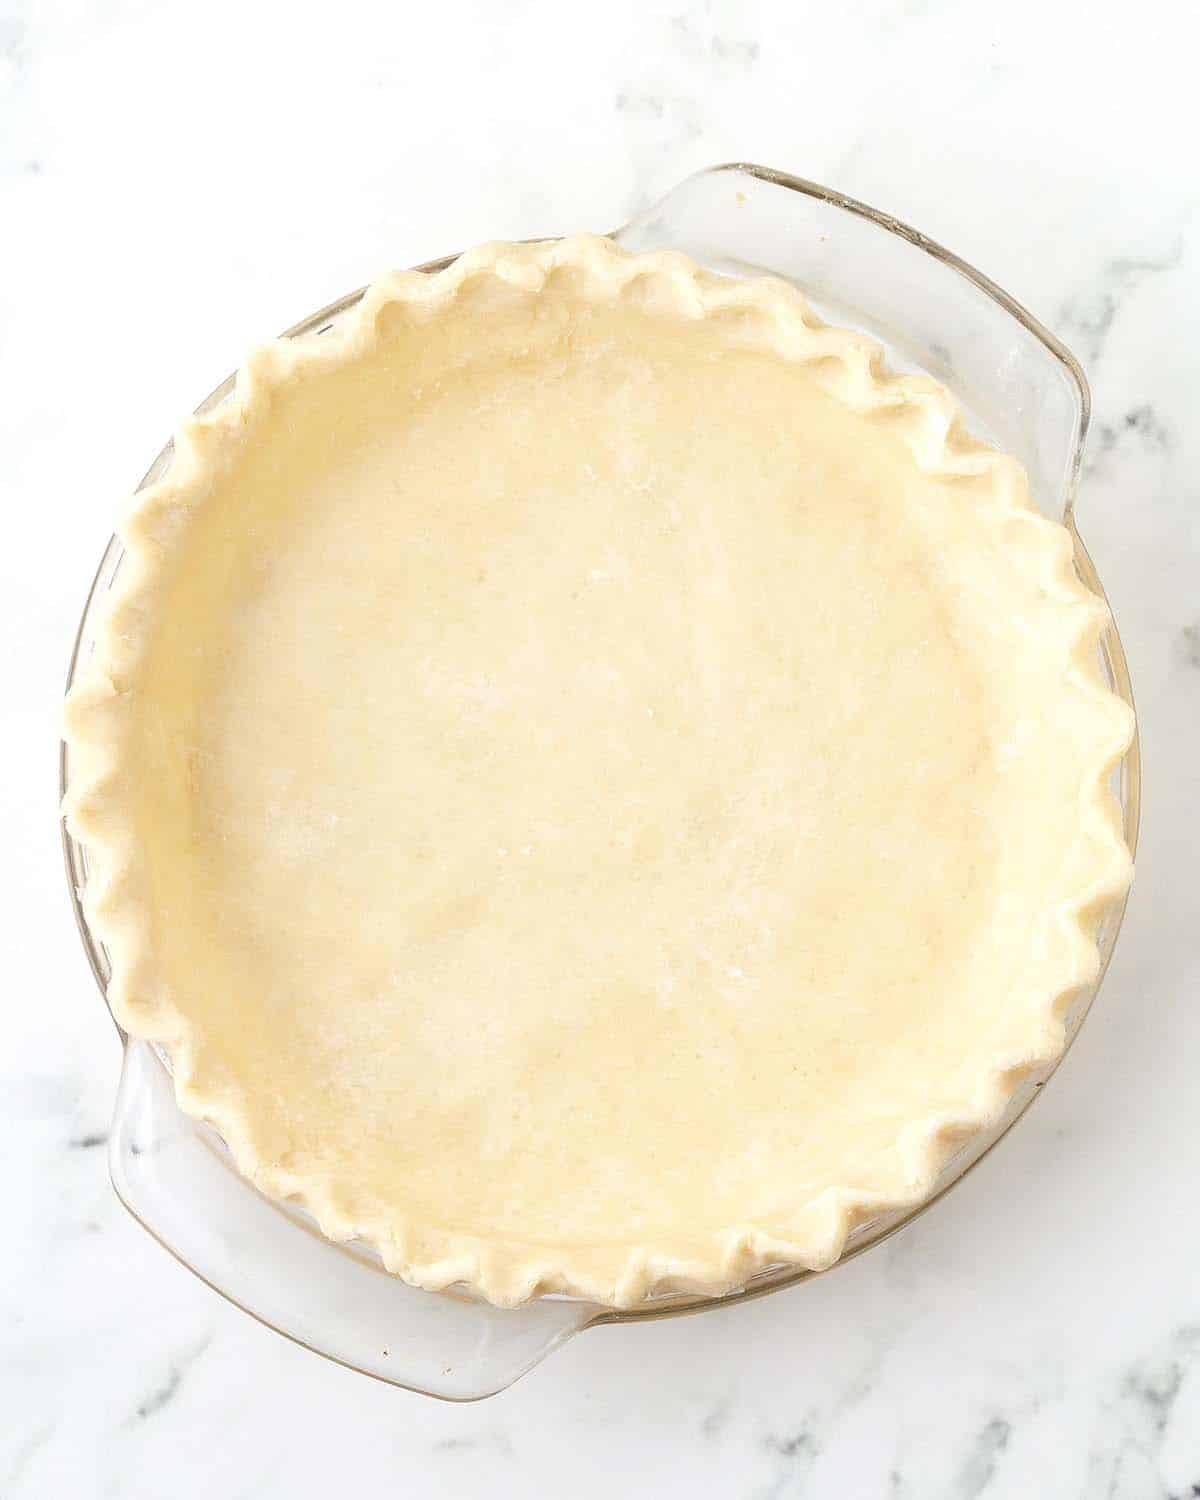 An overhead image of a pie crust ready to be filled and baked.